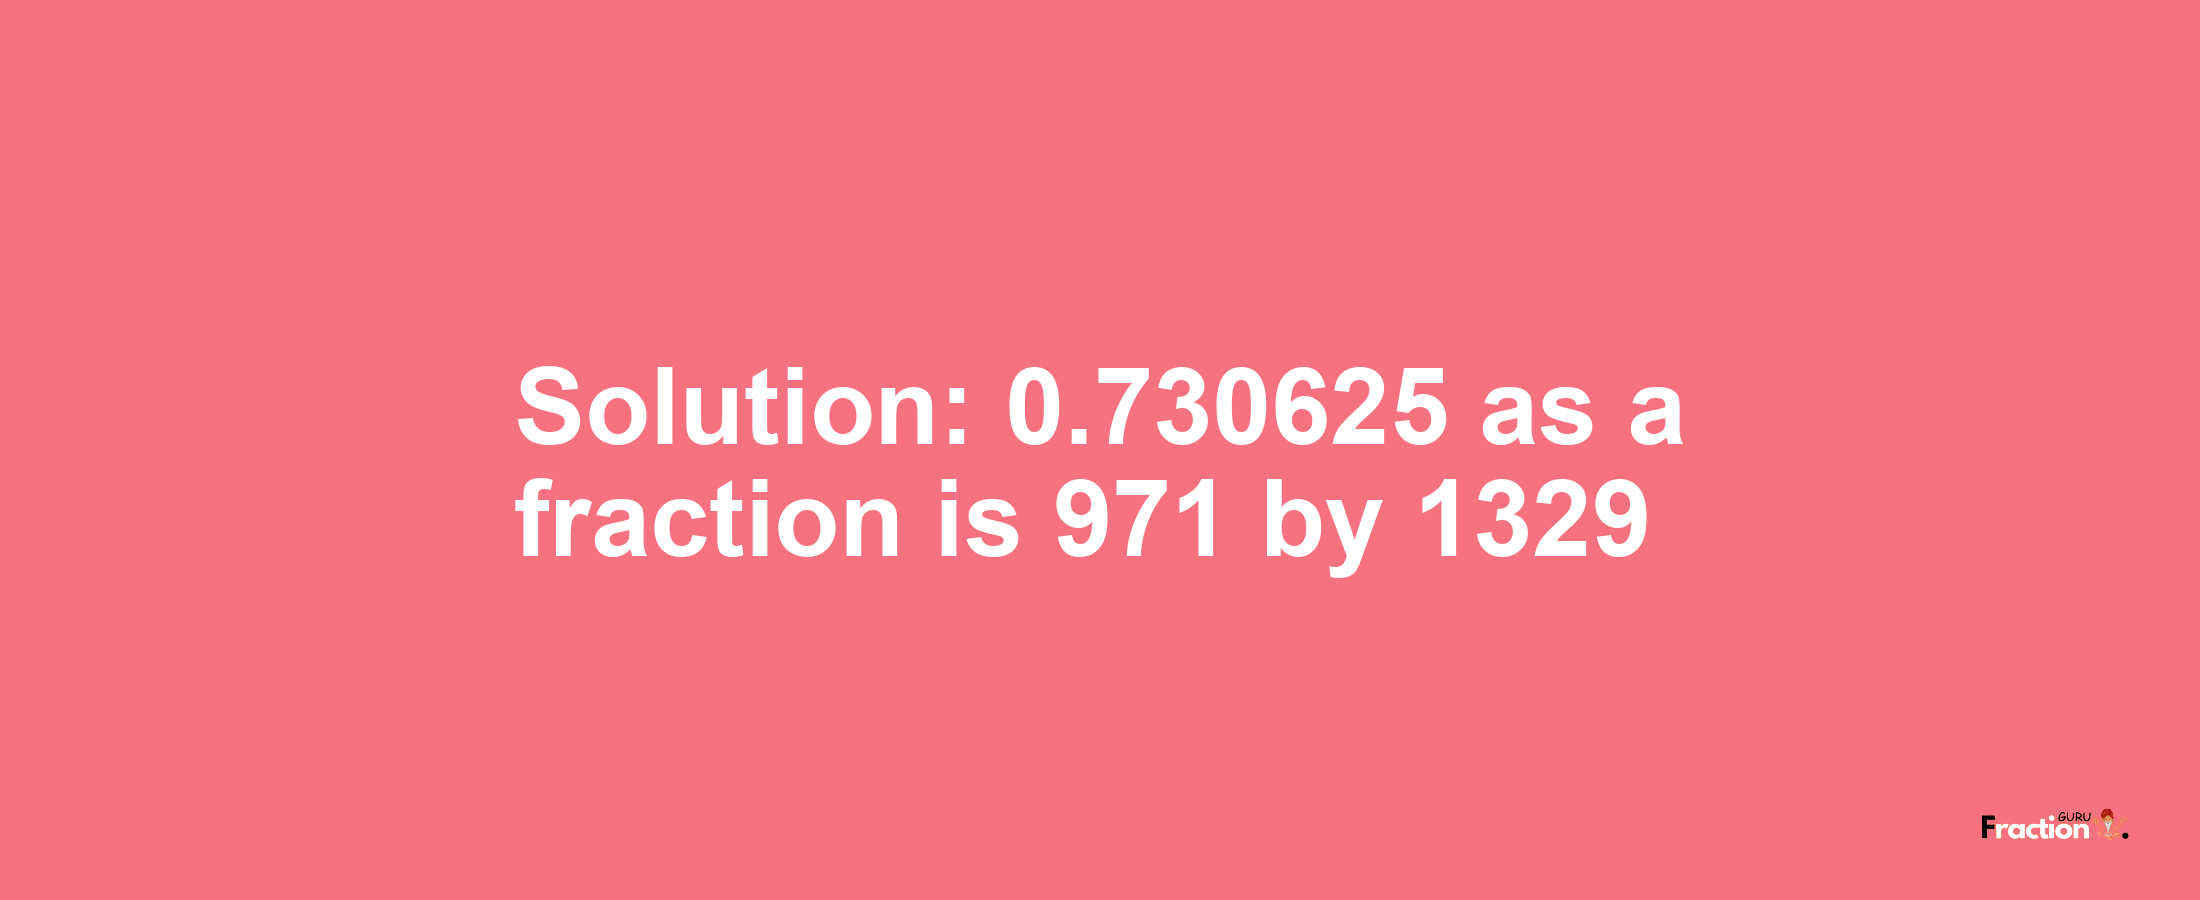 Solution:0.730625 as a fraction is 971/1329